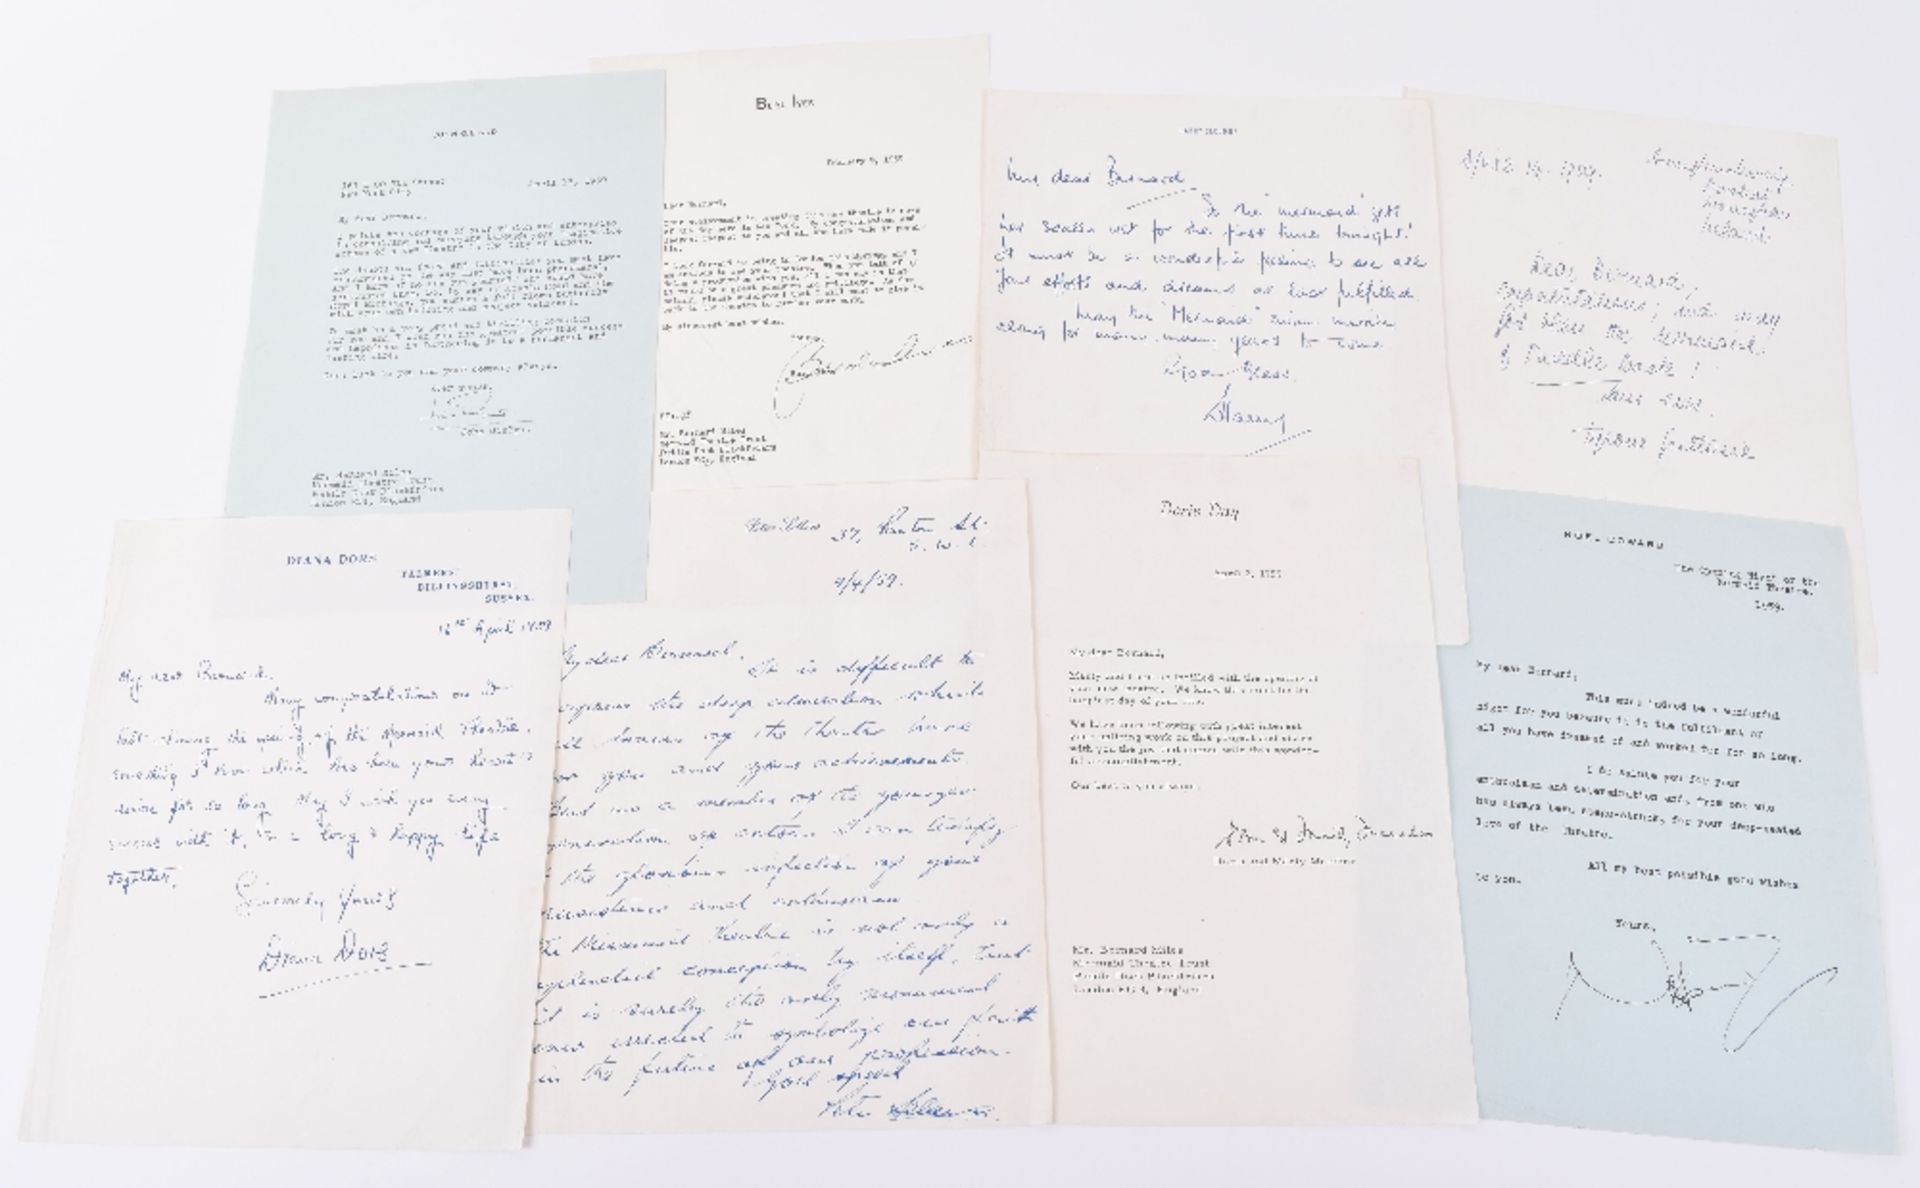 A number of typed and handwritten personal letters relating to the opening of the Mermaid Theatre